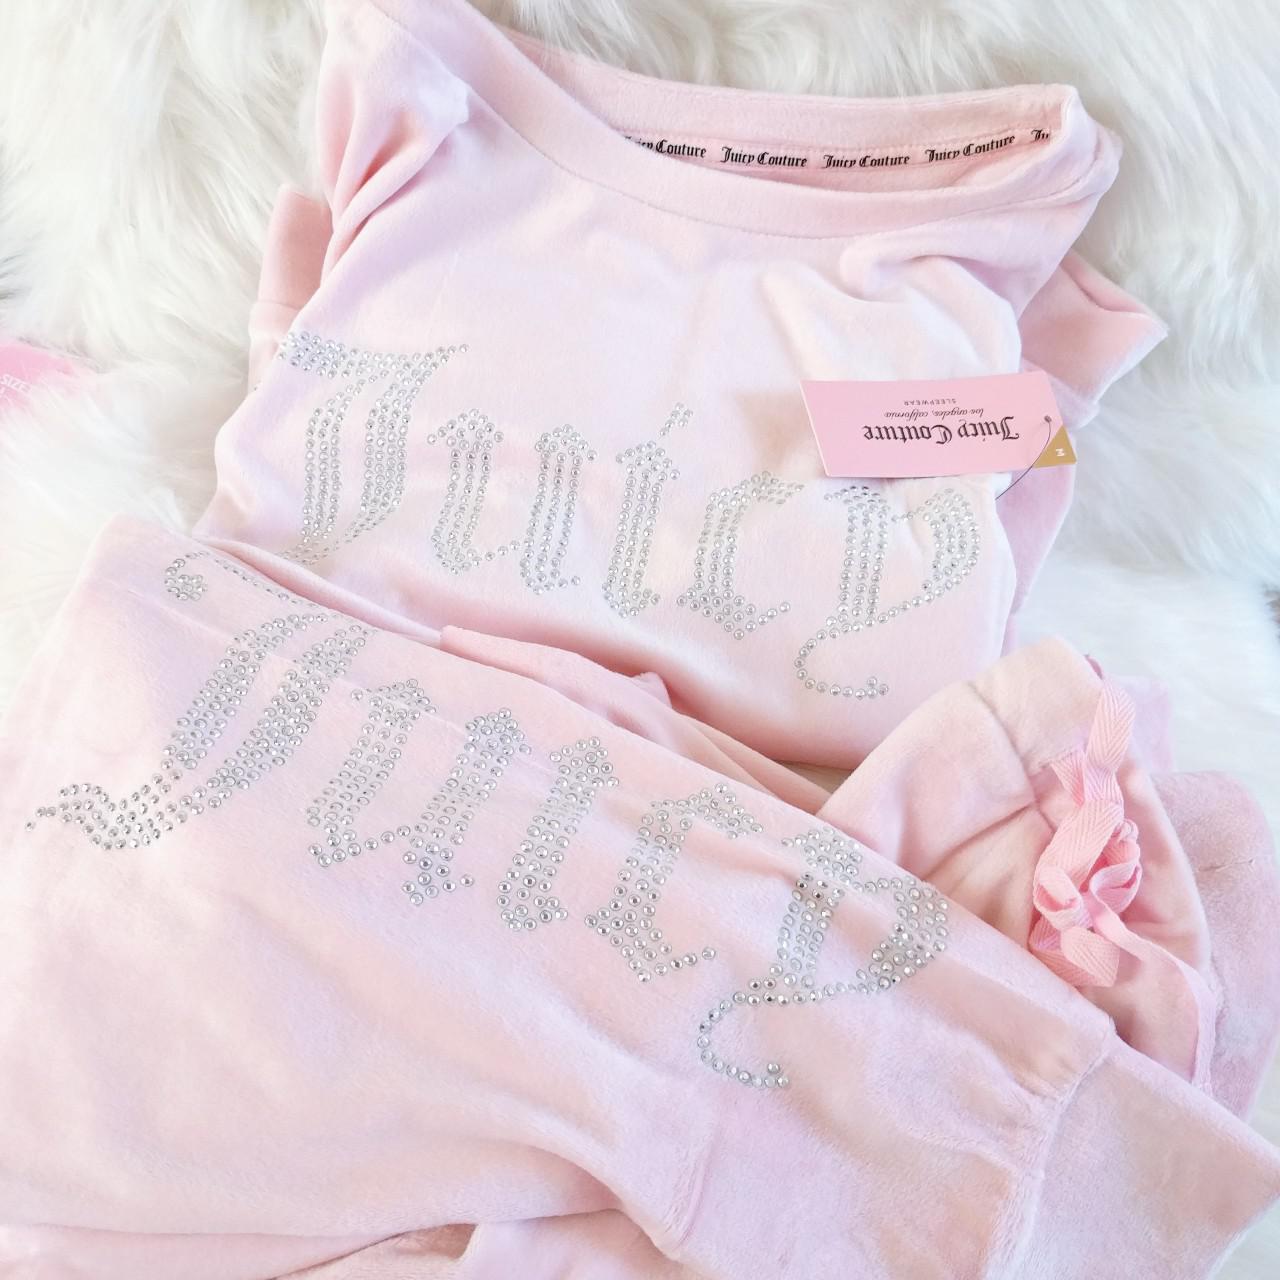 Juicy Couture, Intimates & Sleepwear, Juicy Couture